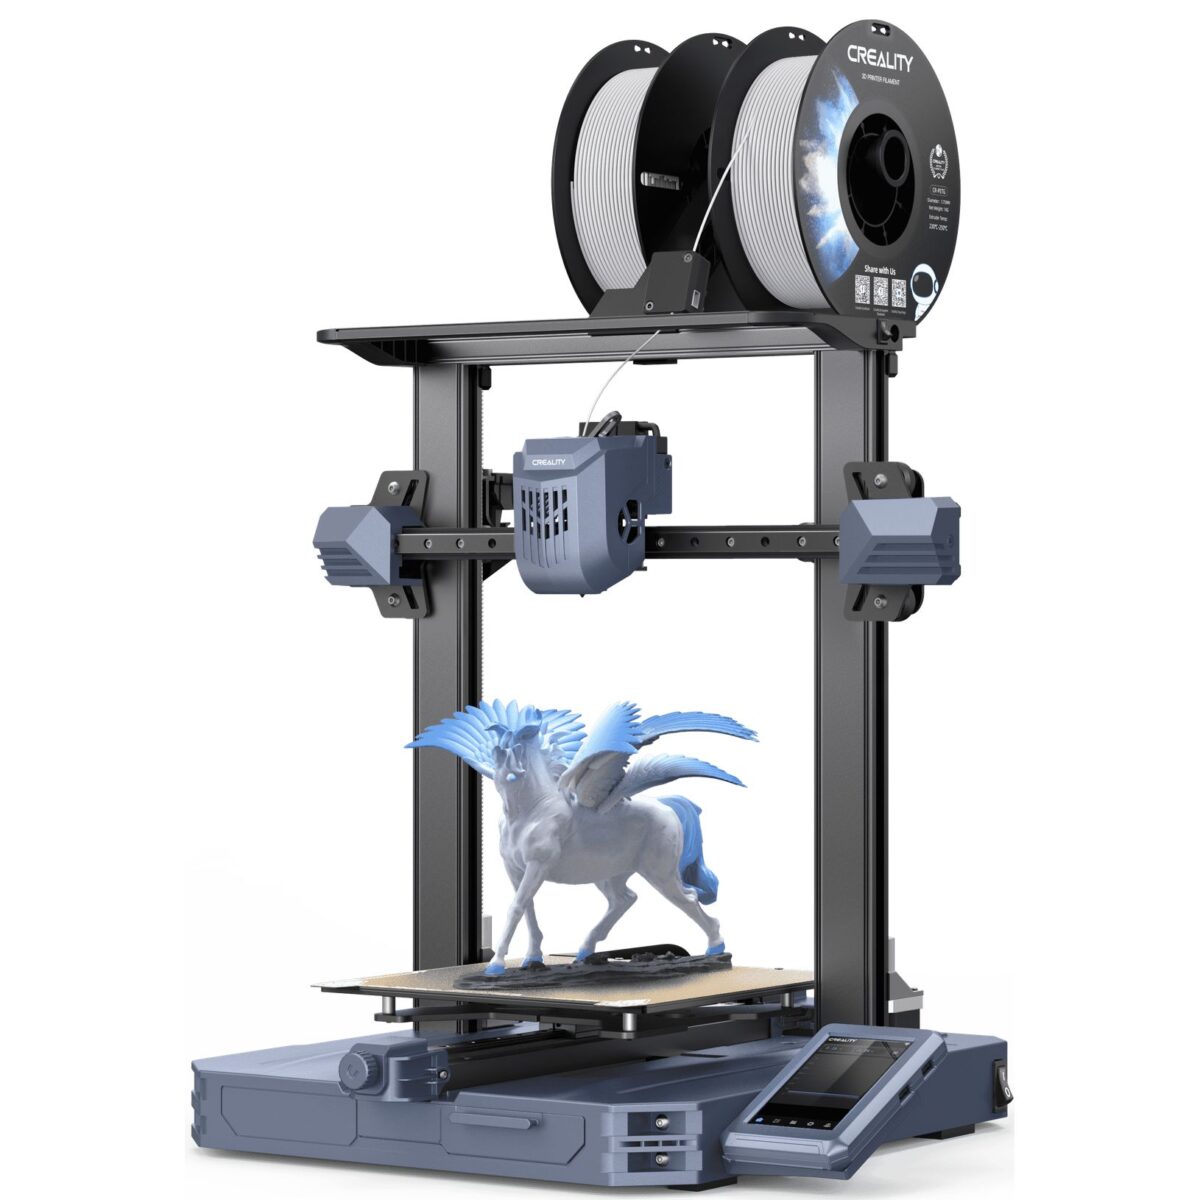 CREALITY CR-10 SE 3D Printer - 600mm/s Speed - Auto Level - linear rails on X and Y axis 22x22x26 - CREALITY 2.35.71.00.021